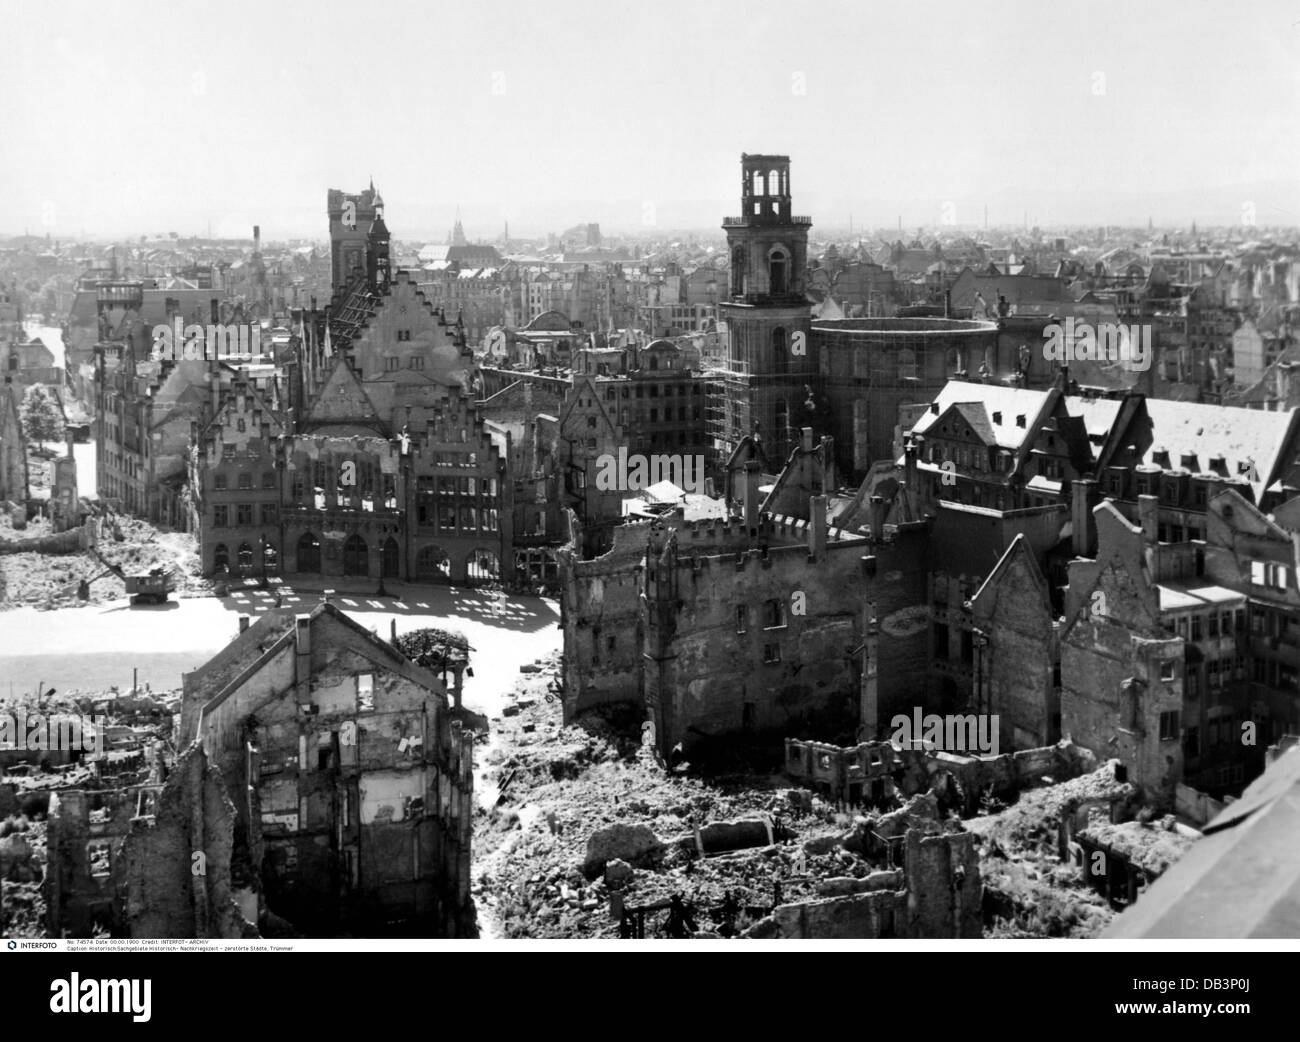 postwar period, destroyed cities, Frankfurt on the Main, Germany, 1945, Additional-Rights-Clearences-Not Available Stock Photo